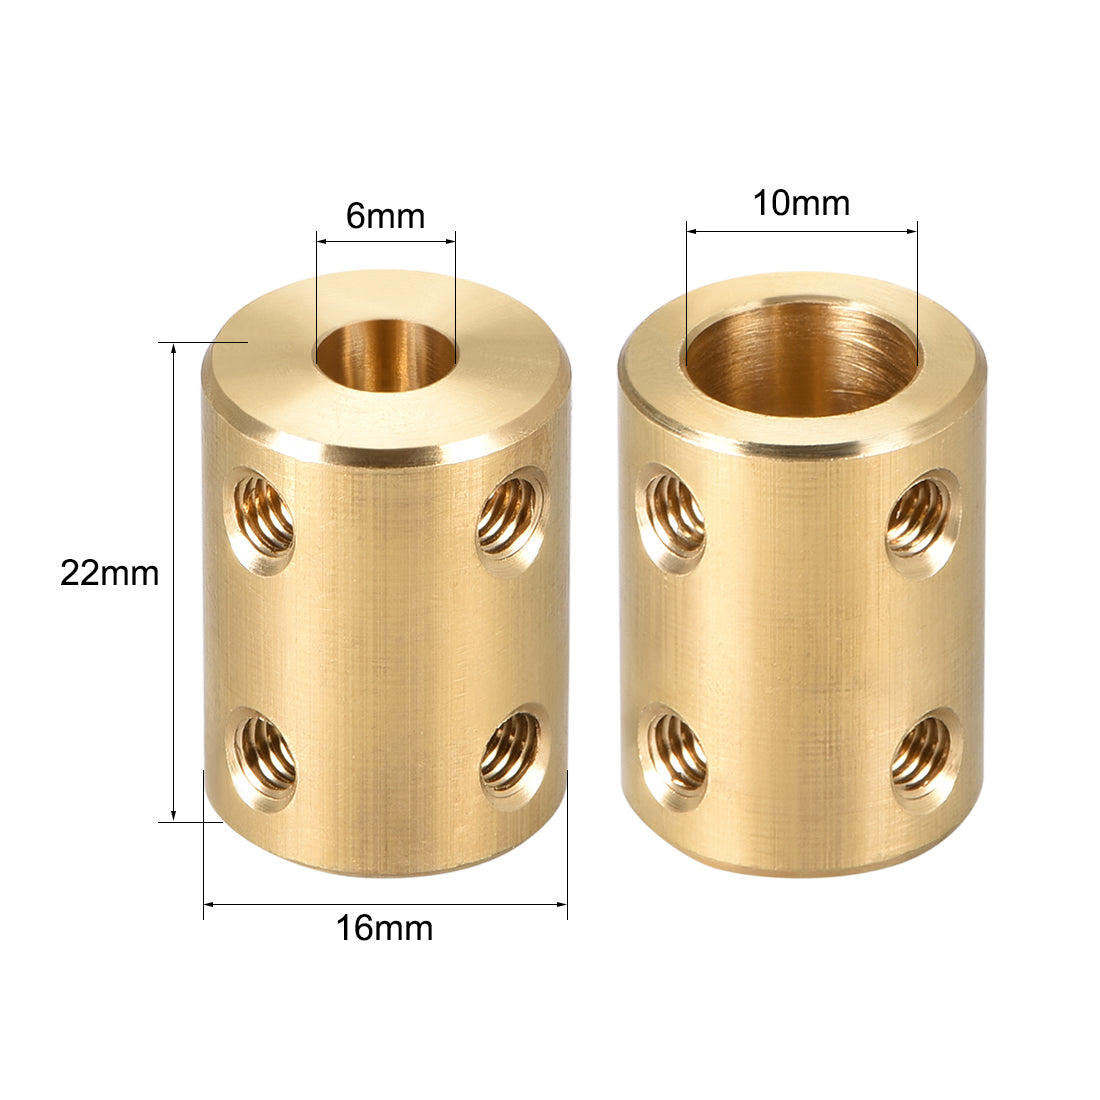 uxcell Uxcell Shaft Coupling 6mm to 10mm Bore L22xD16 Robot Motor Wheel Rigid Coupler Connector Gold Tone